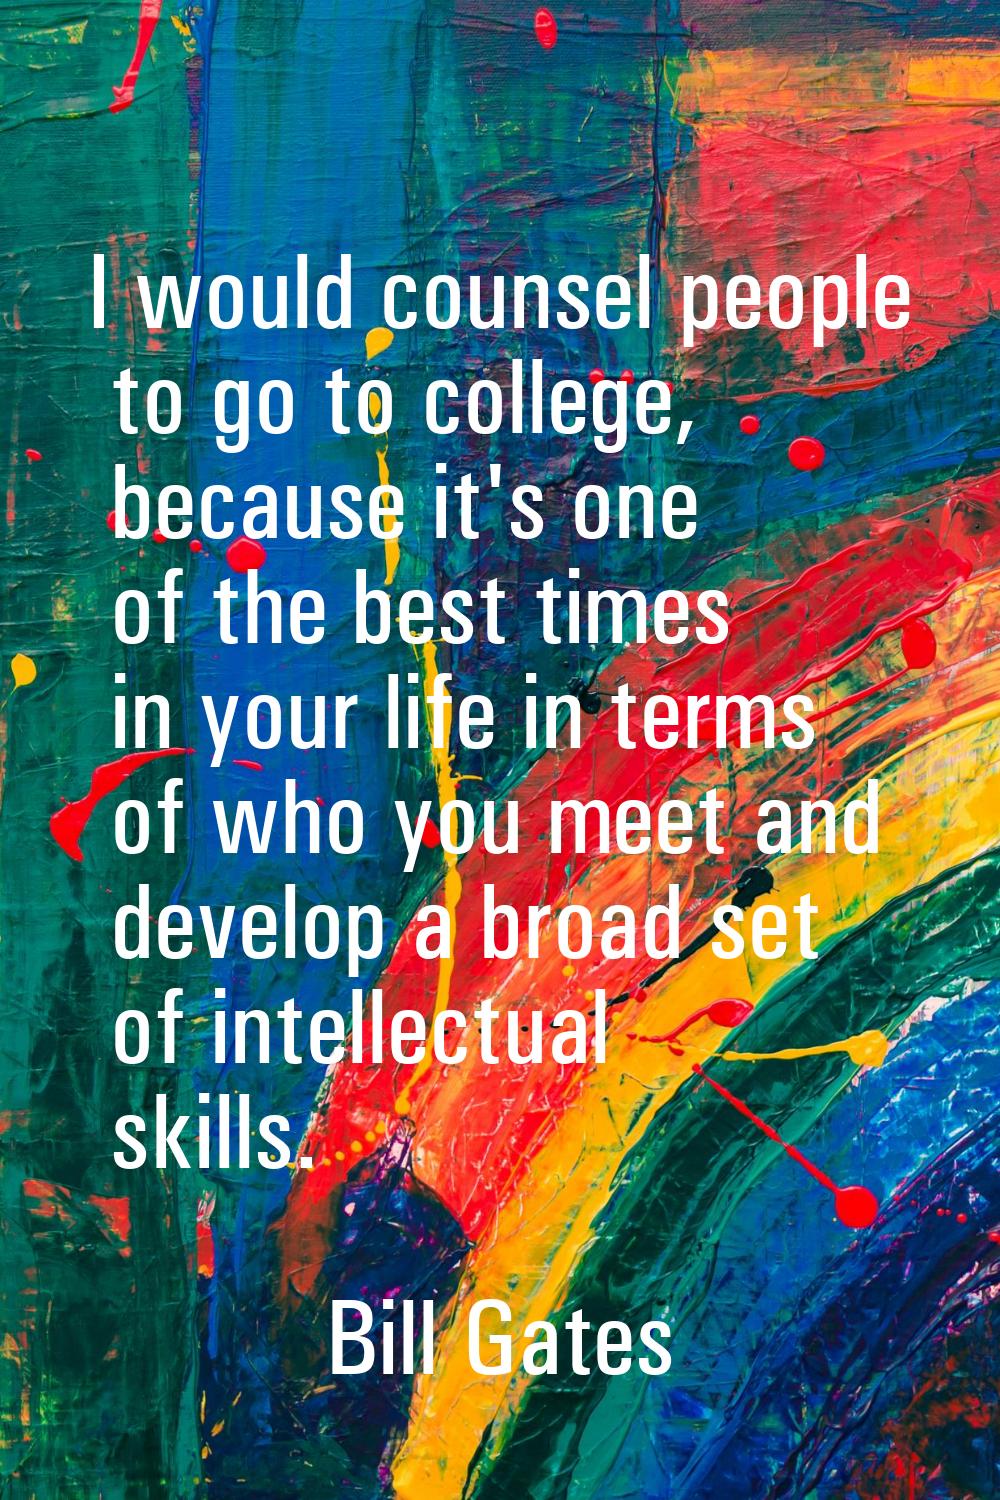 I would counsel people to go to college, because it's one of the best times in your life in terms o